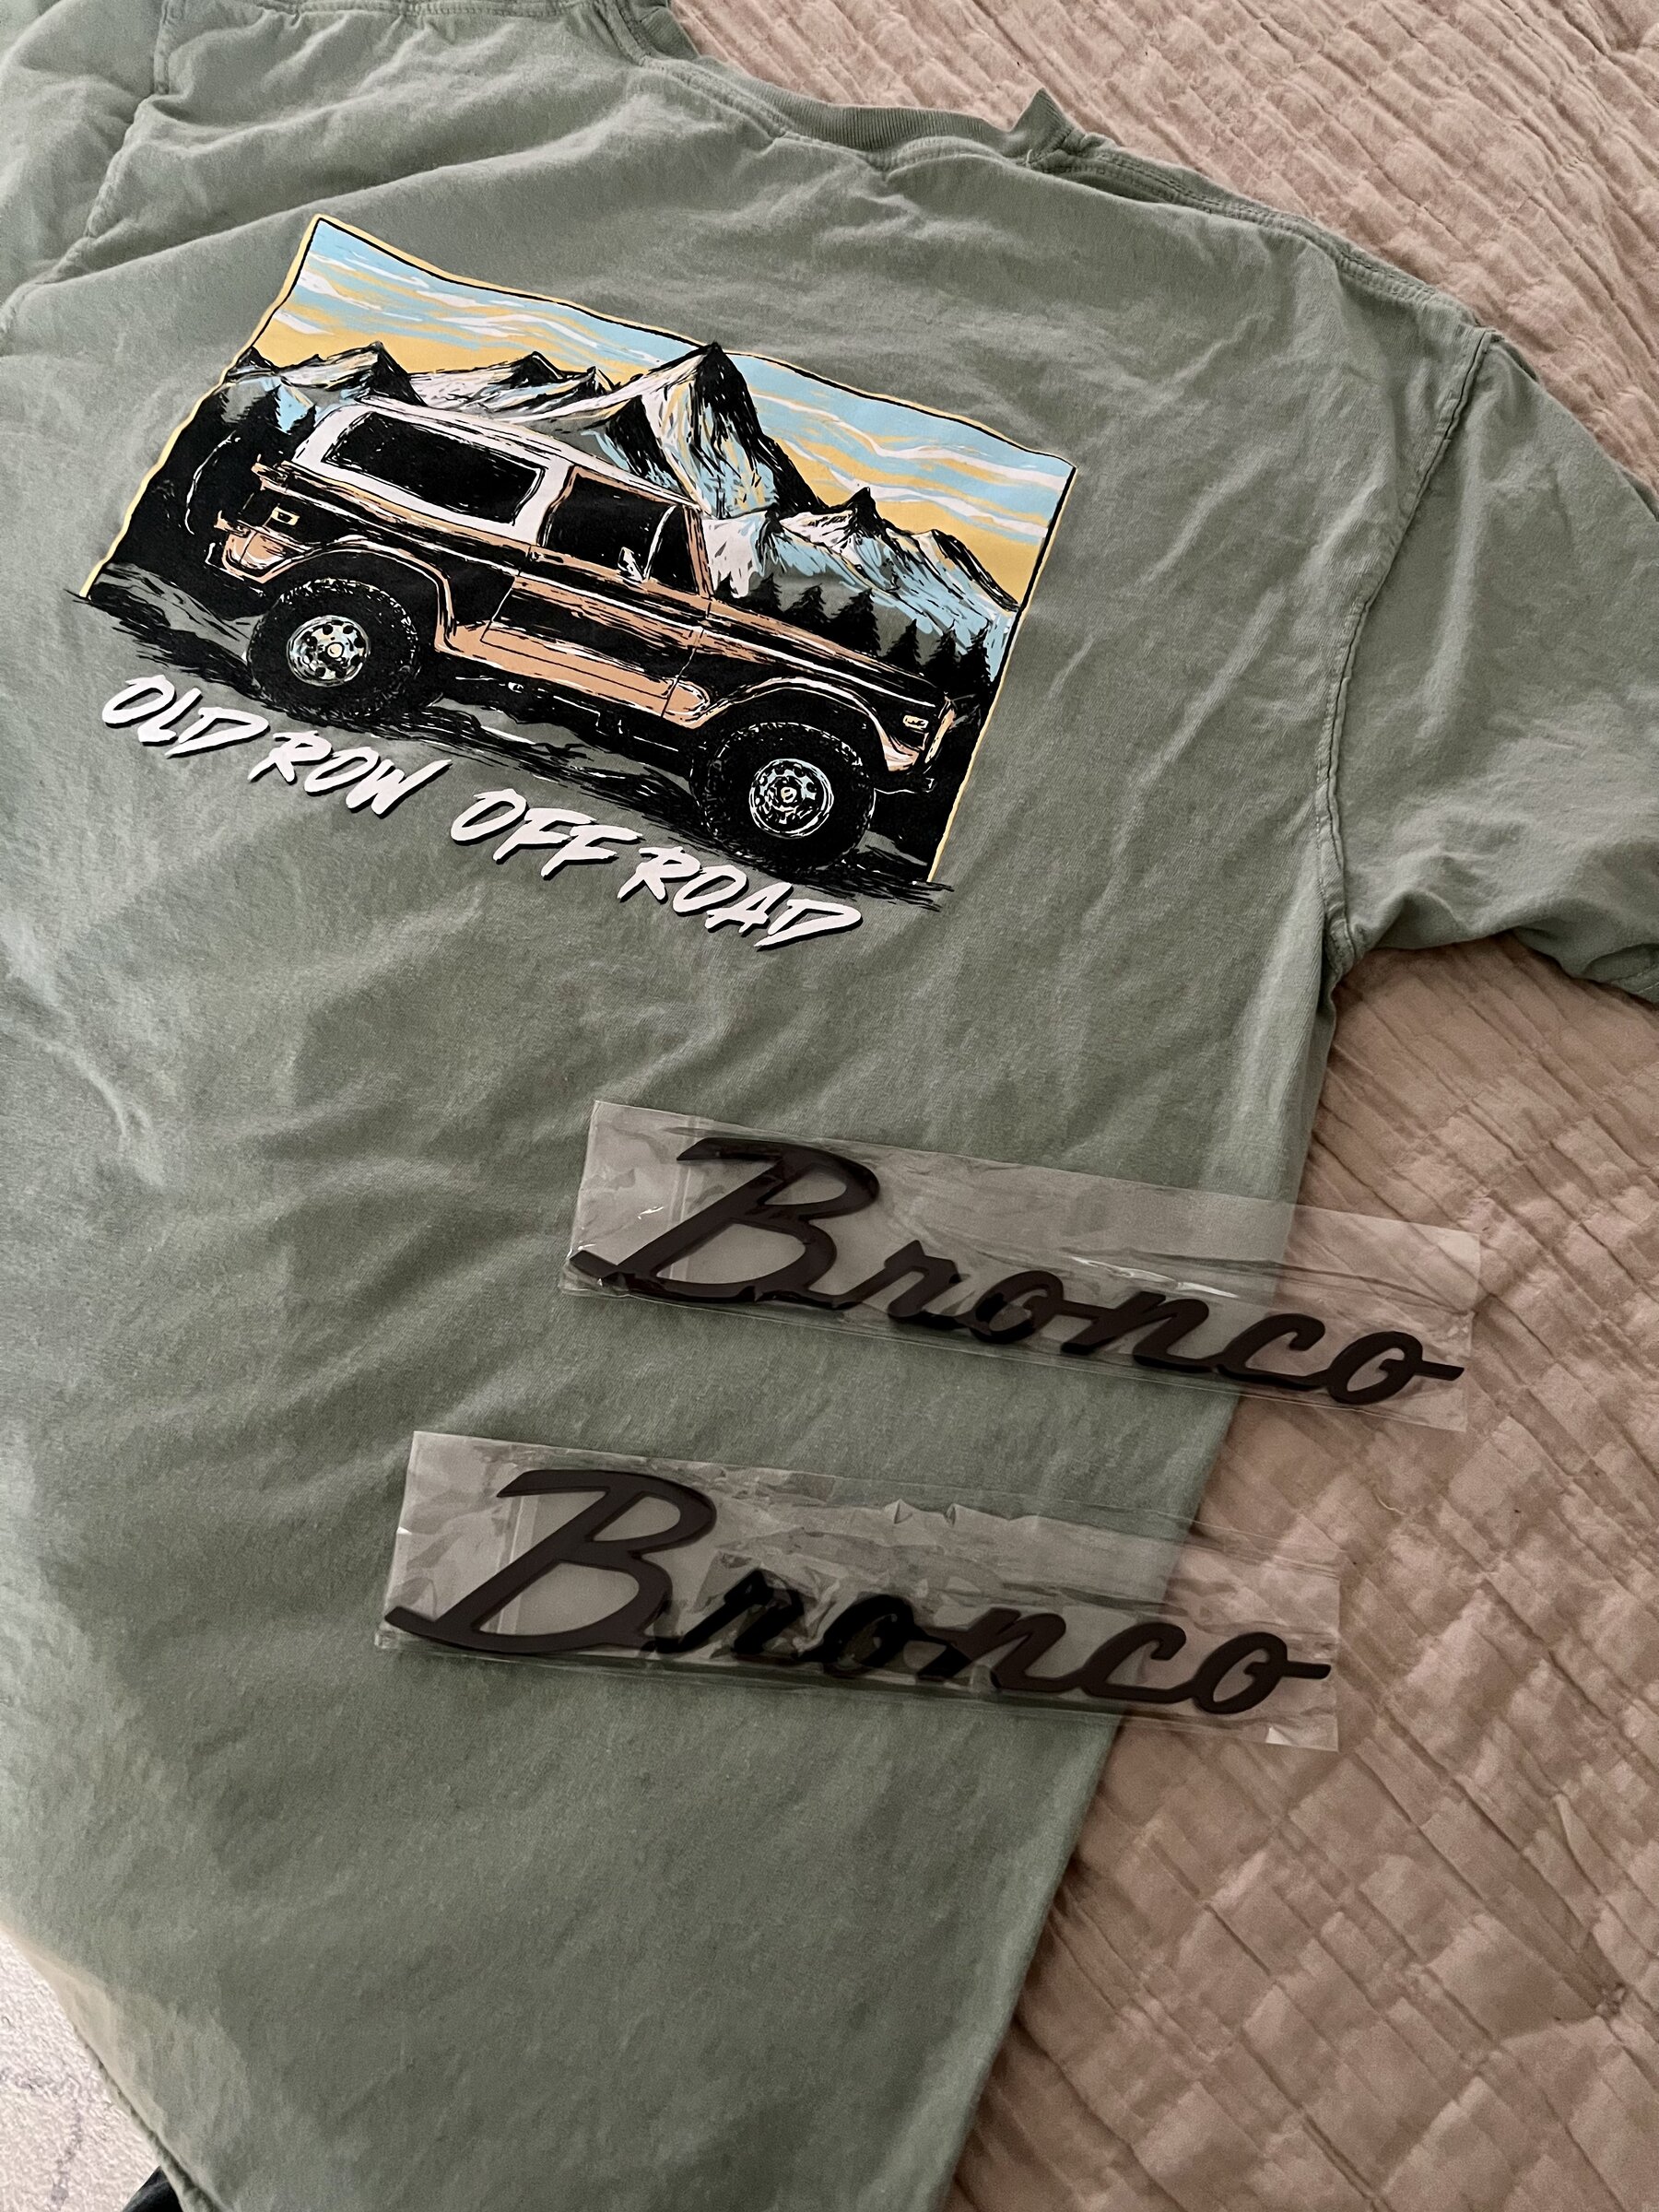 Ford Bronco Show Your Christmas Bronco Swag 4020A965-6832-4CCE-BB9A-C2CE33BEE4C3